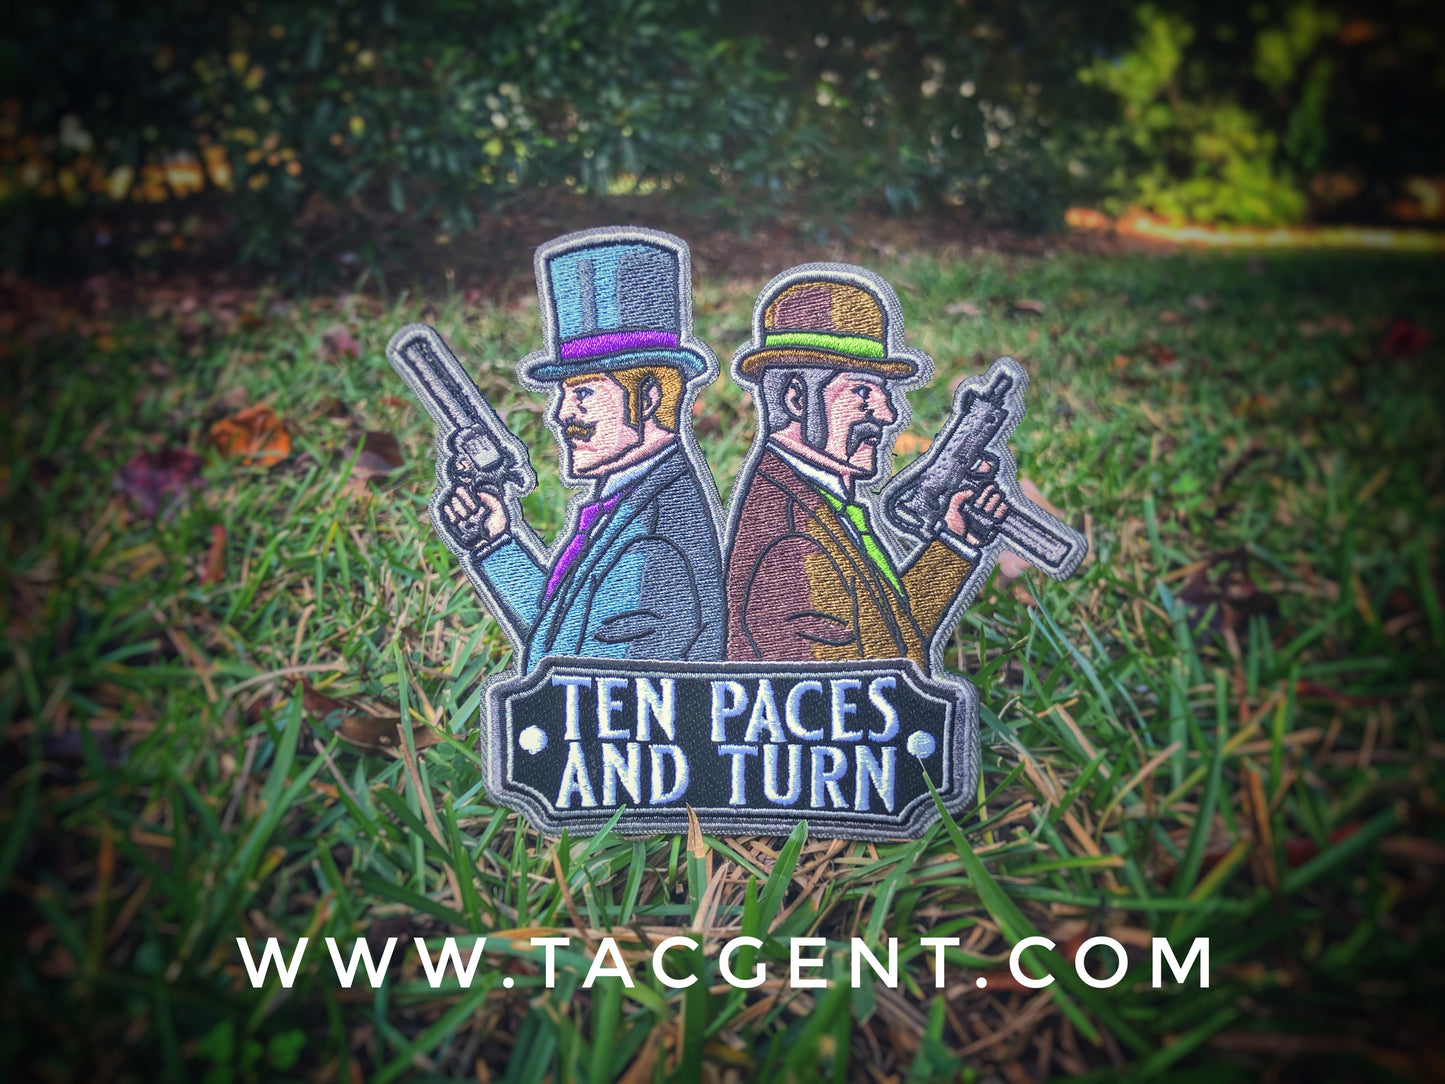 "10 Paces" Dueling Gent Patch